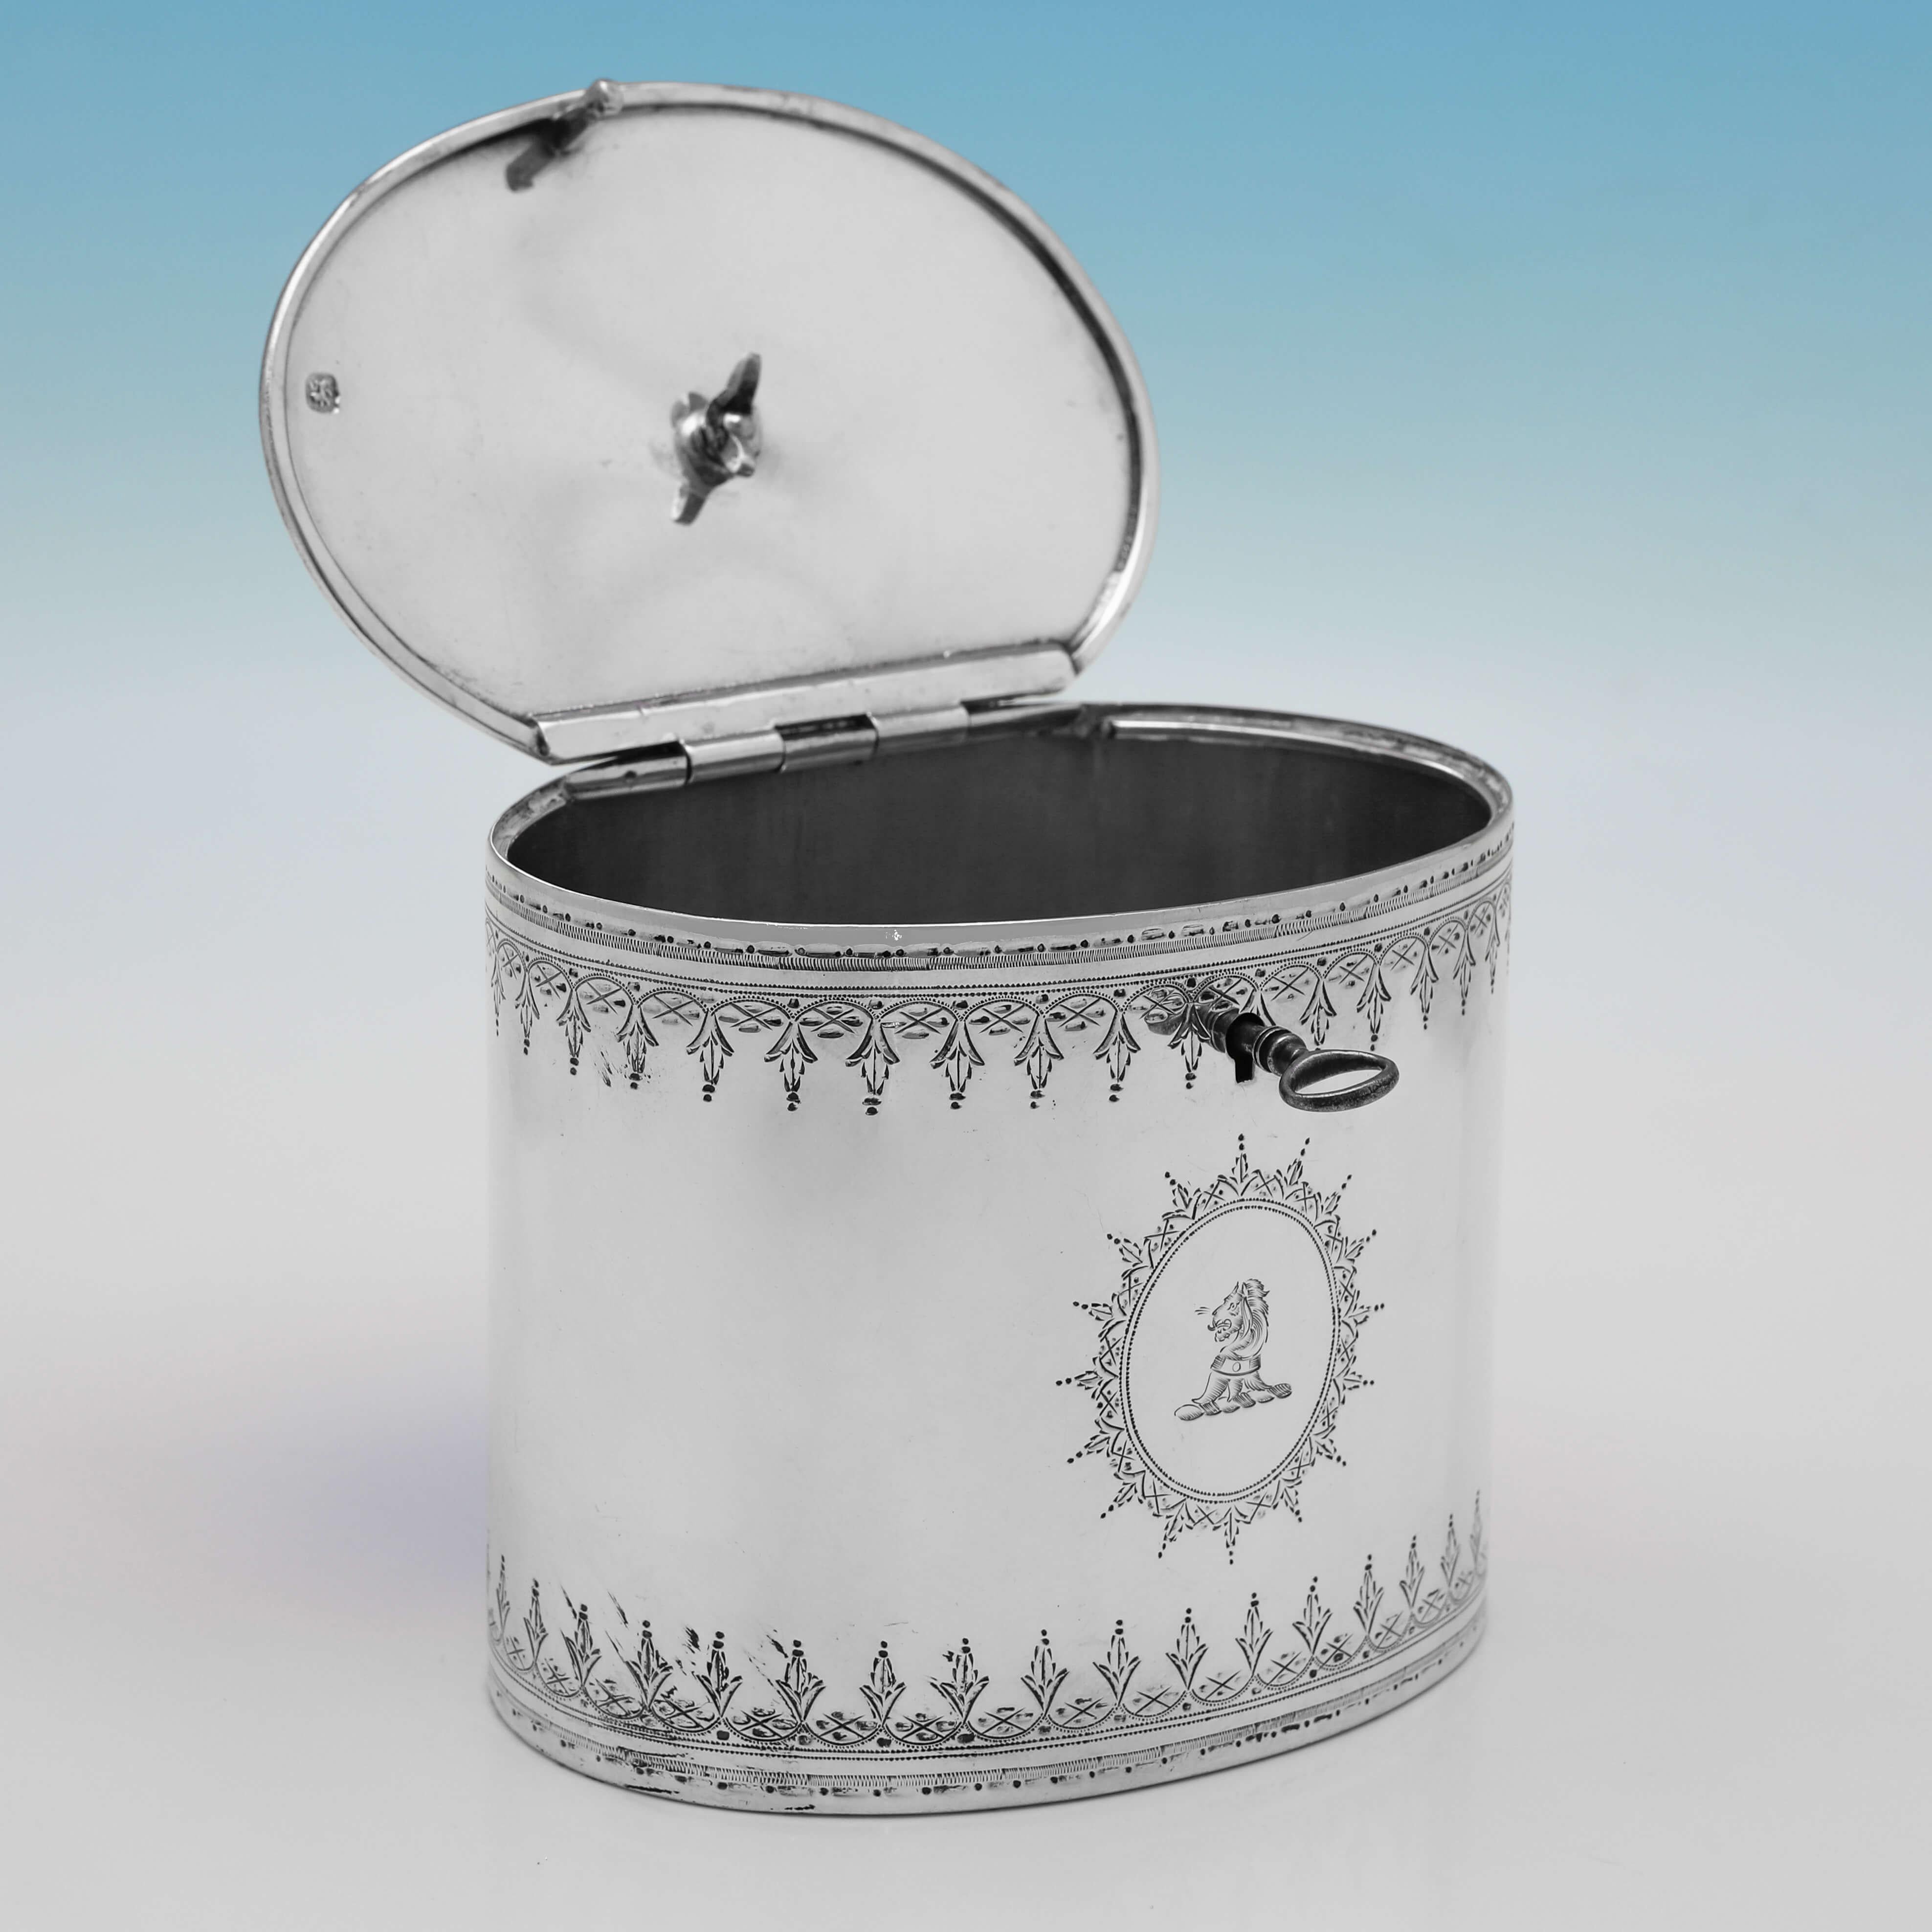 Hallmarked in London in 1806 by Thomas Paine Dexter, this charming, George III period, Antique Sterling Silver Tea Caddy, is oval in shape, and in the Neoclassical taste, with bright cut engraved decoration to the body and lid, a tea plant finial,